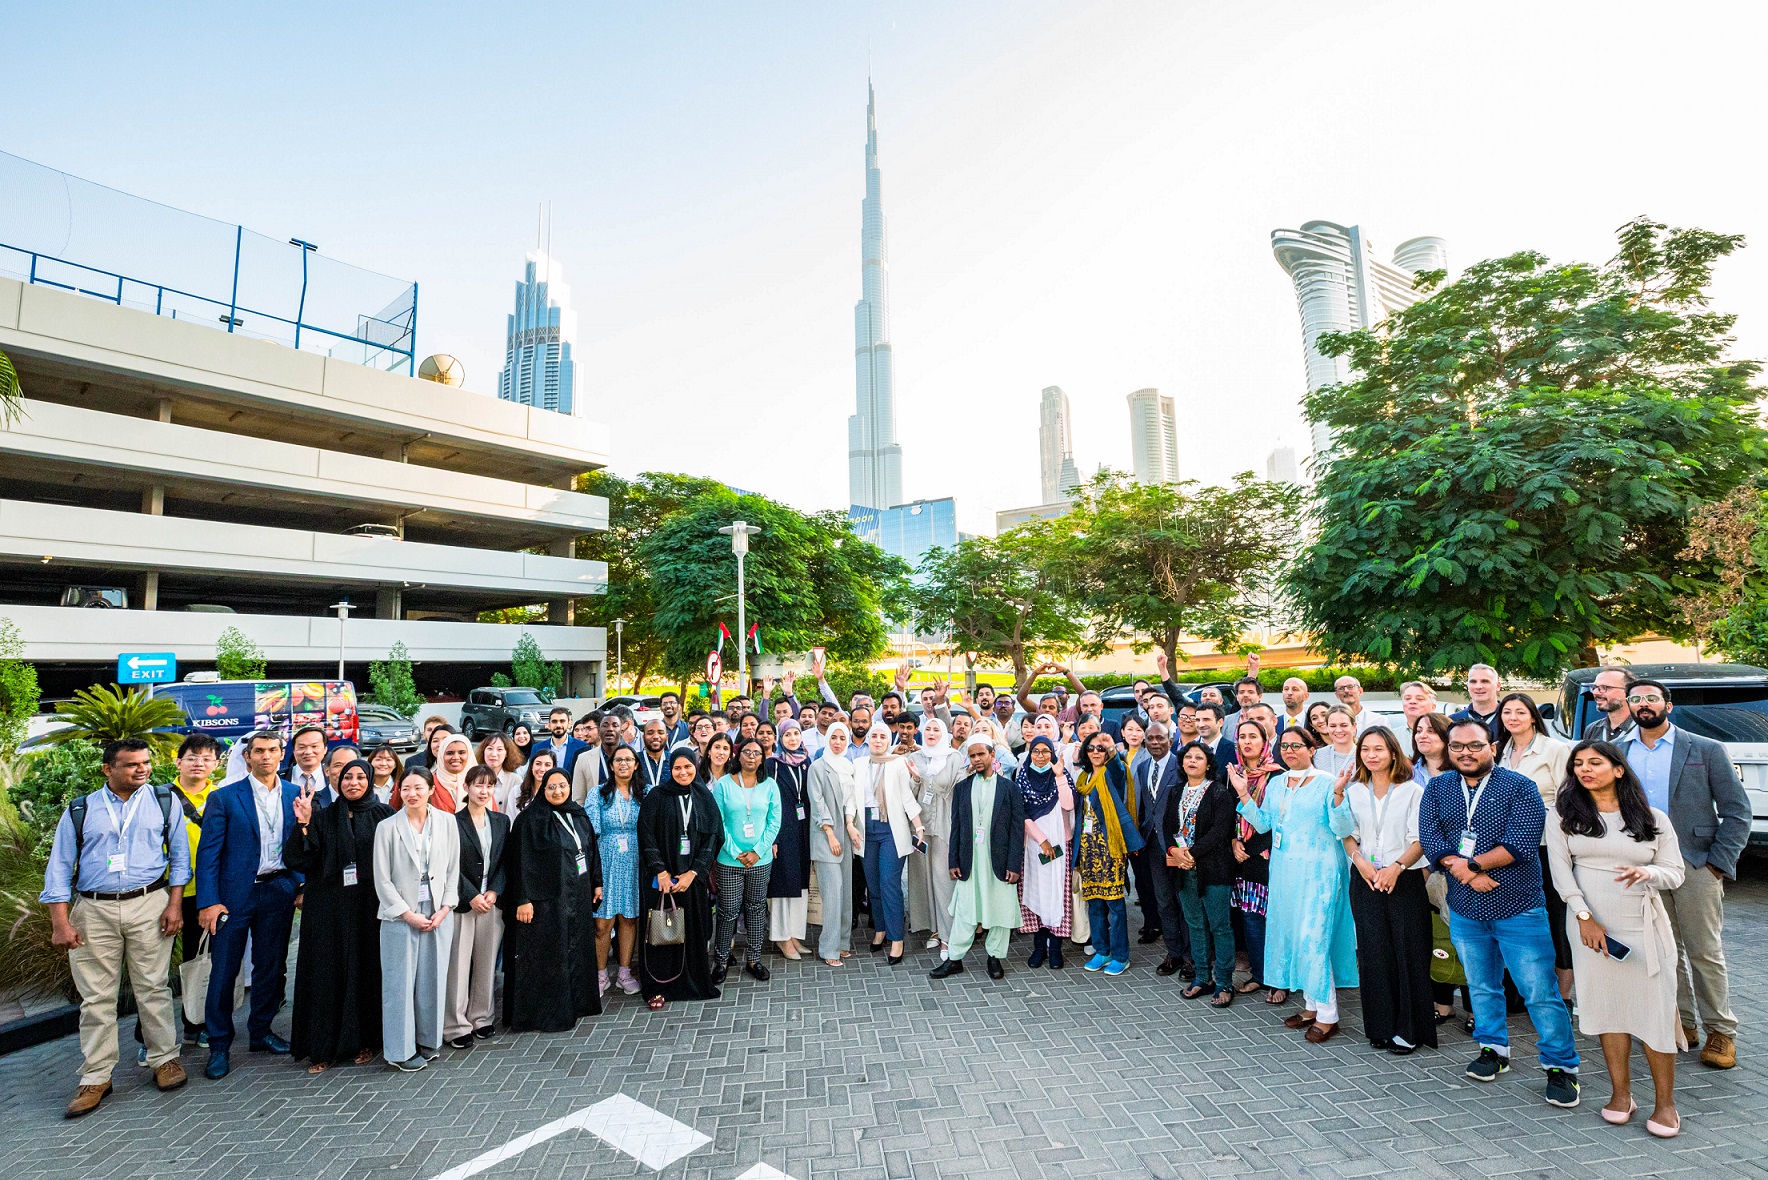 Dubai hosts the 15th International Conference on Challenges in